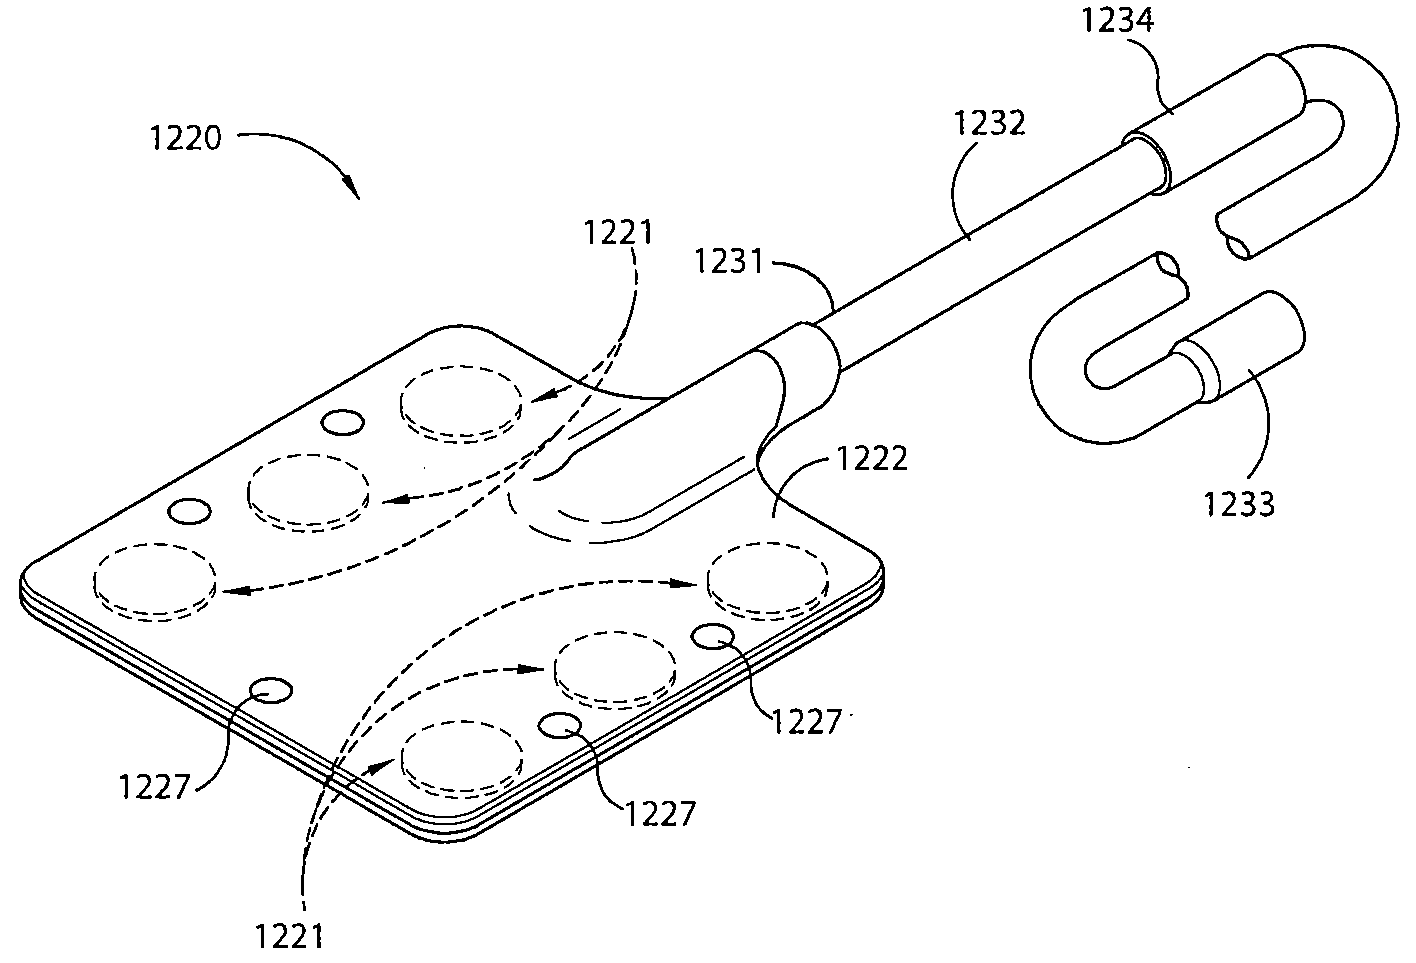 Methods and systems for securing electrode leads